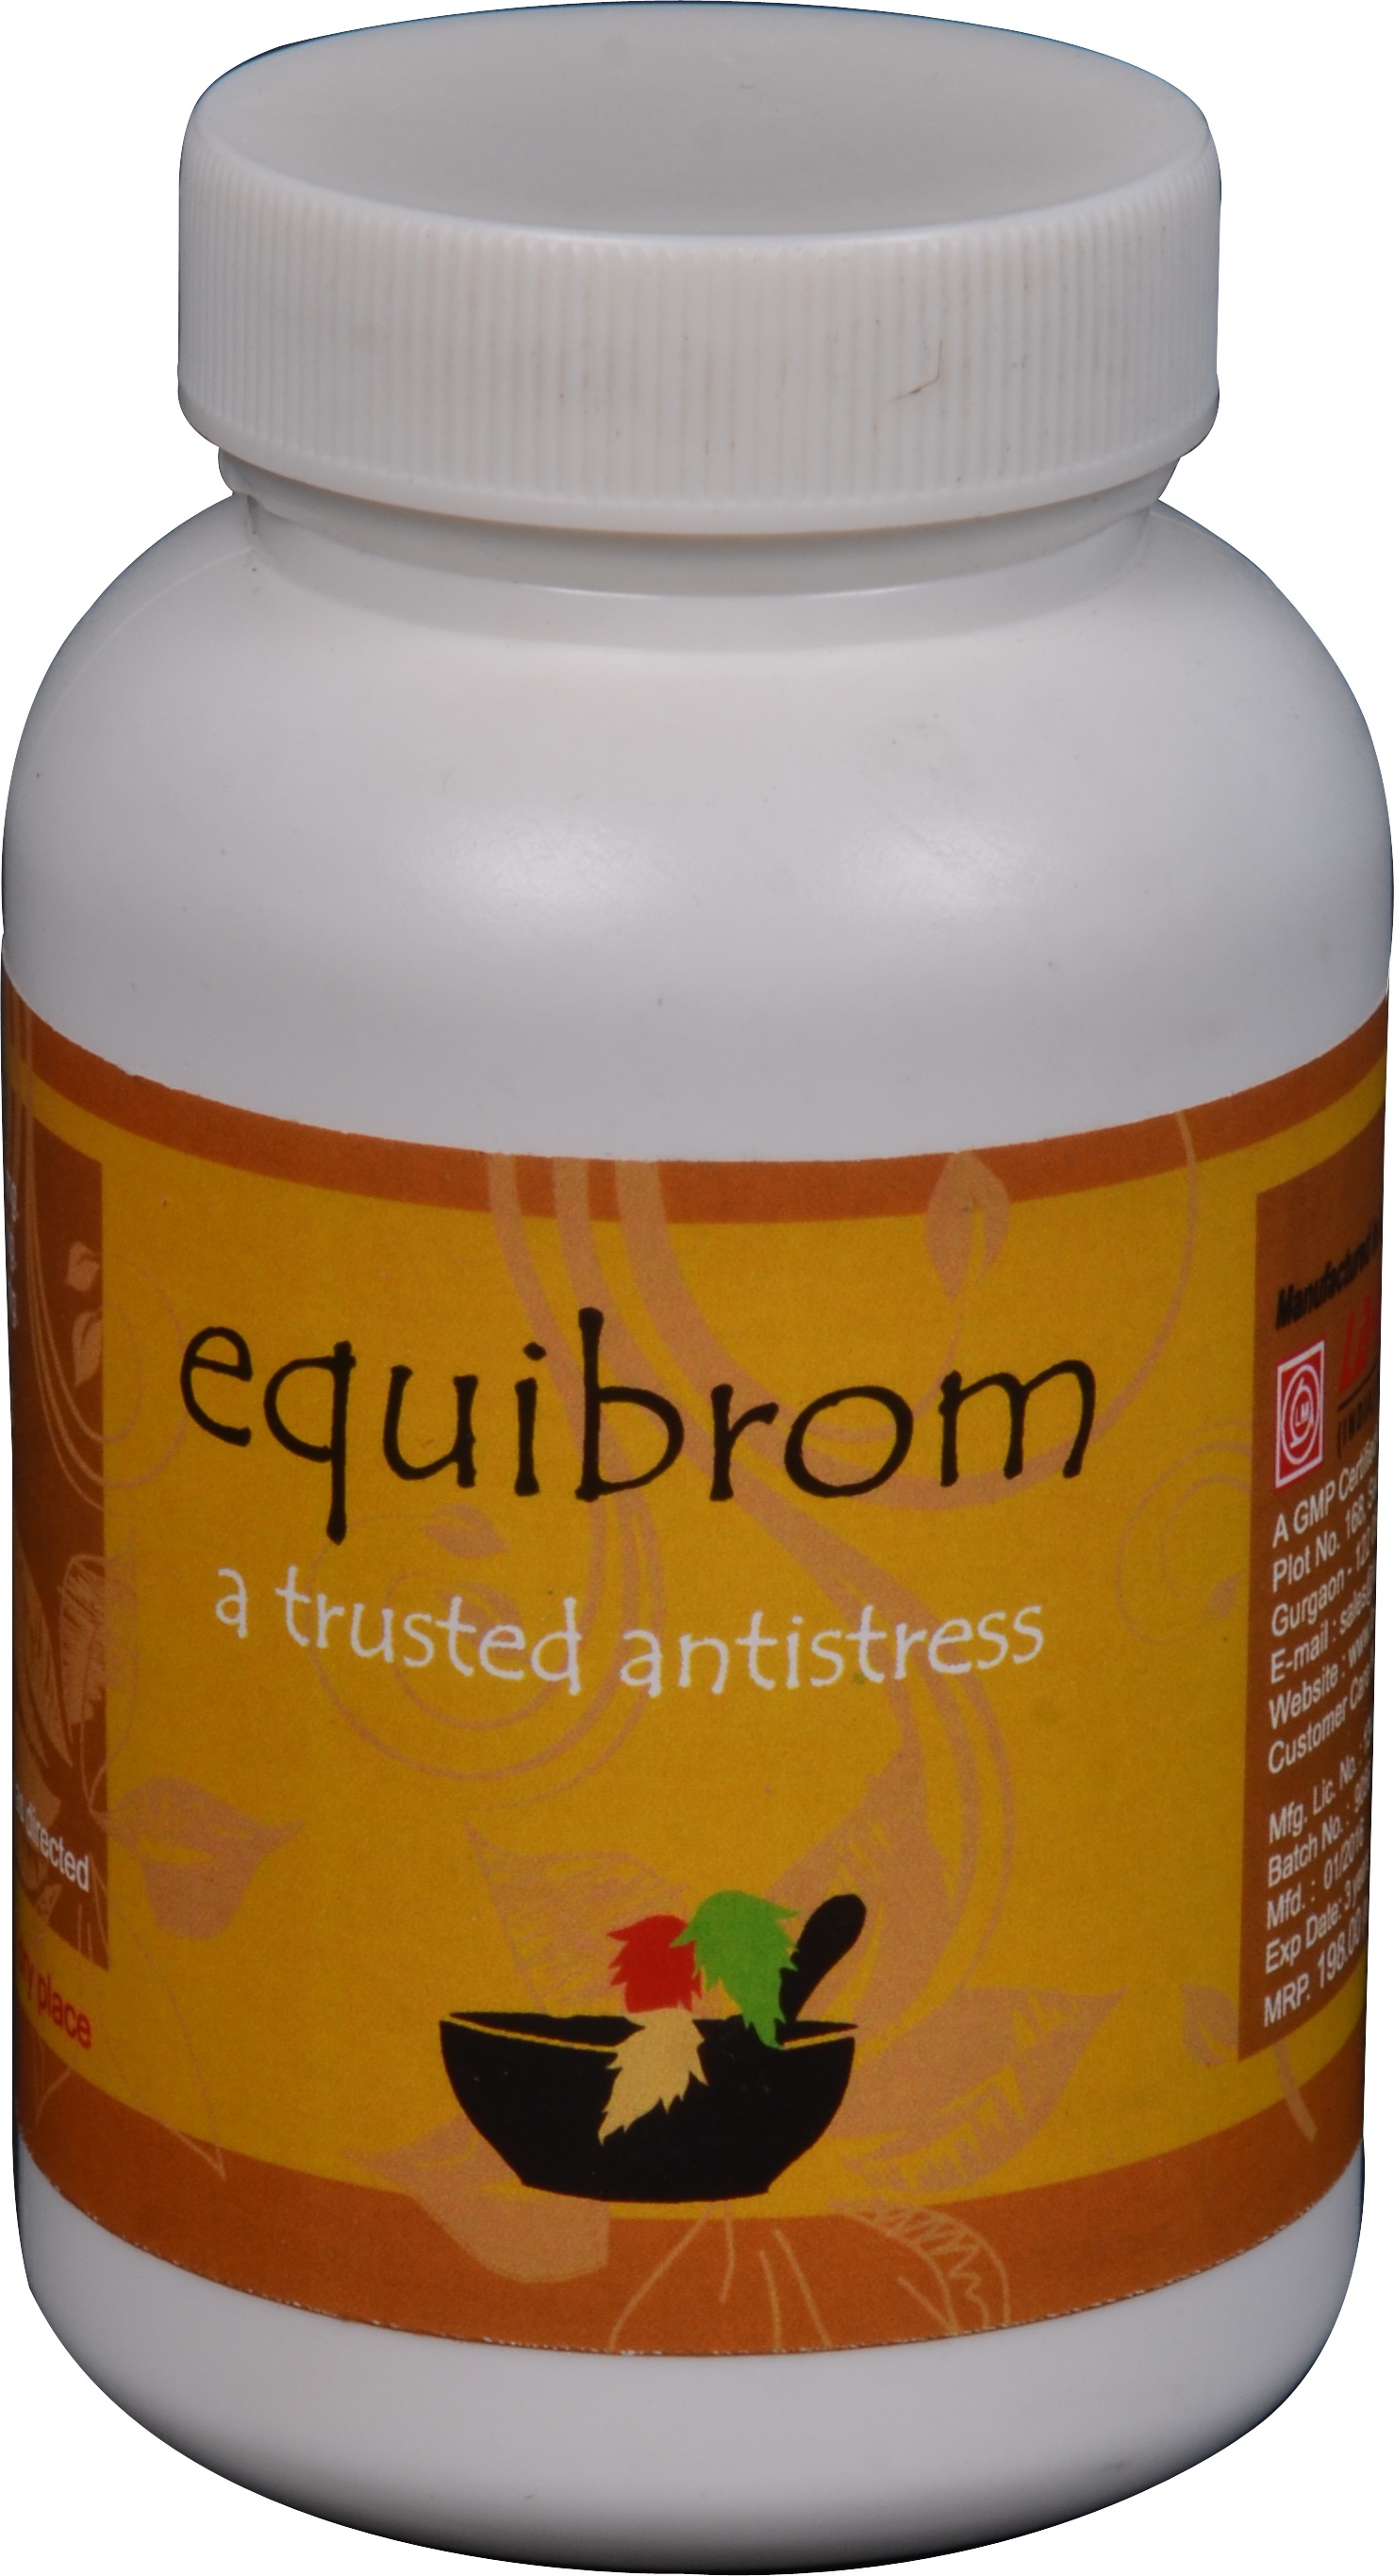 Buy Equibrom Capsules at Best Price Online